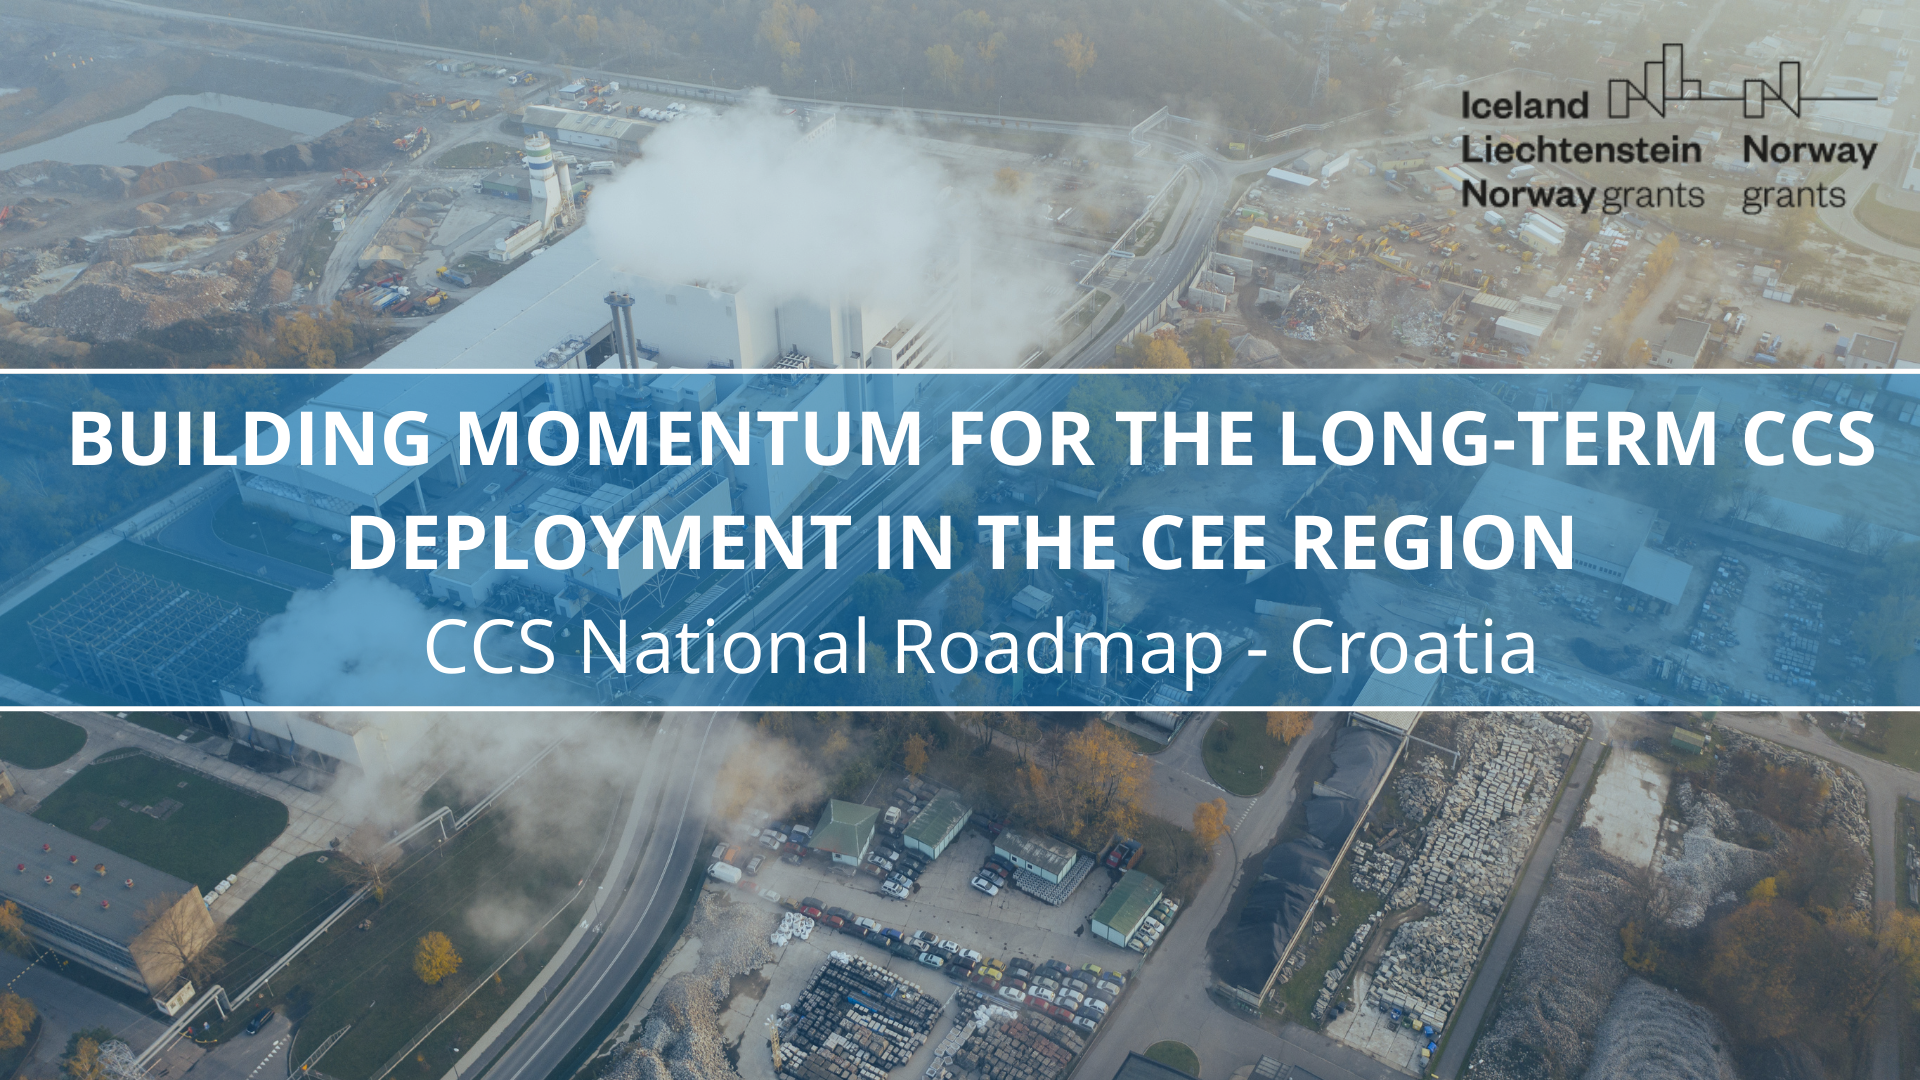 BUILDING MOMENTUM FOR THE LONG-TERM CCS DEPLOYMENT IN THE CEE REGION – CCS National Roadmap – Croatia